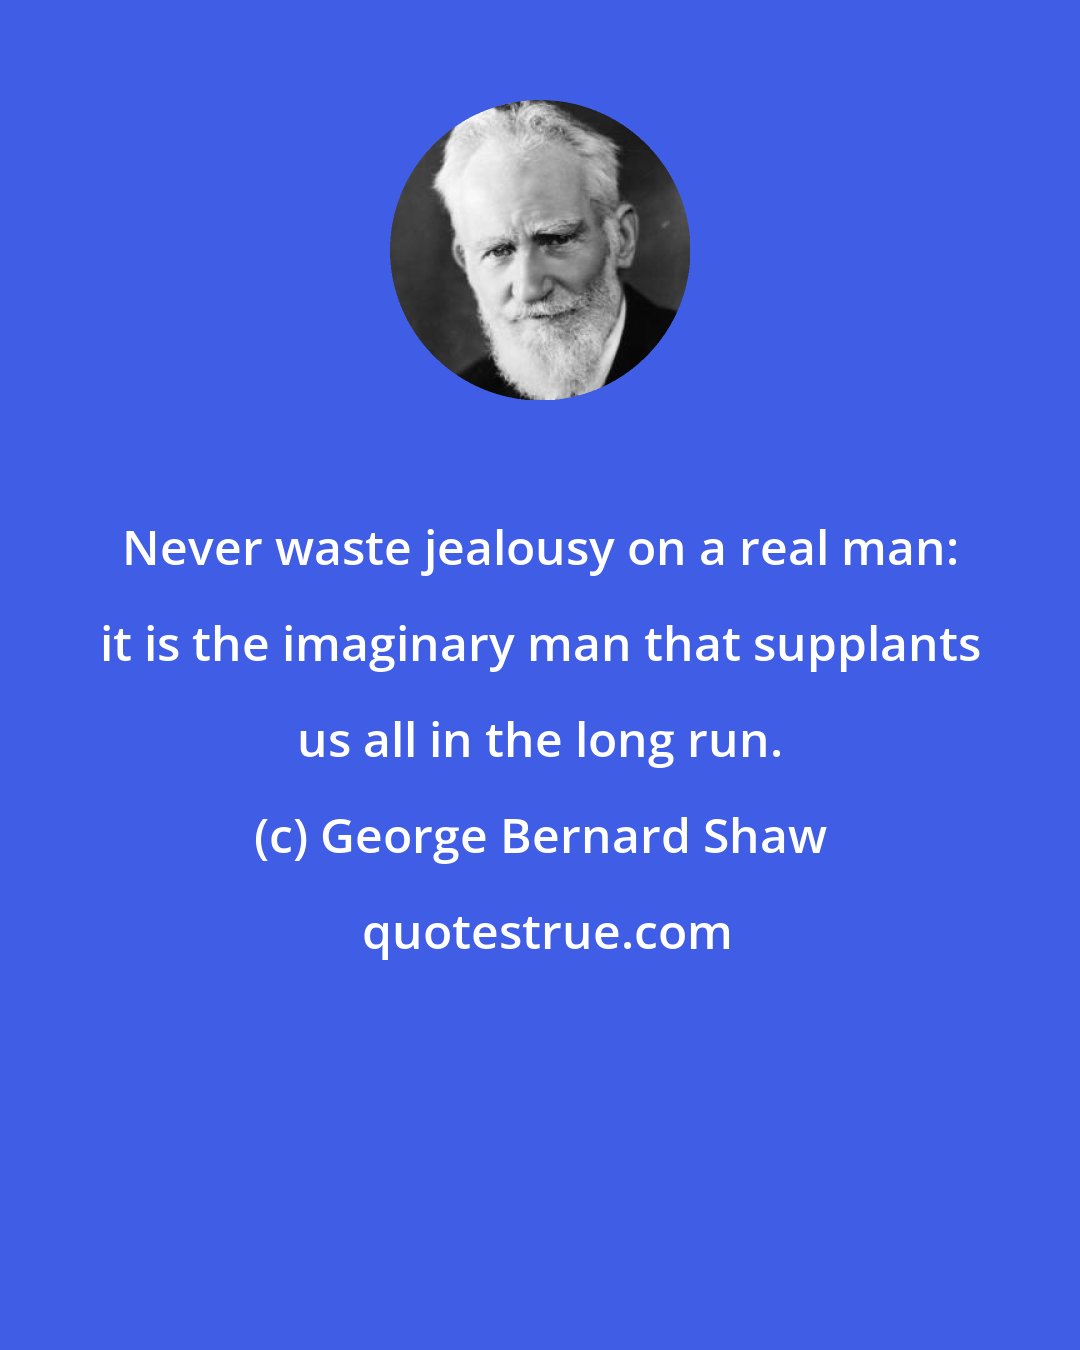 George Bernard Shaw: Never waste jealousy on a real man: it is the imaginary man that supplants us all in the long run.